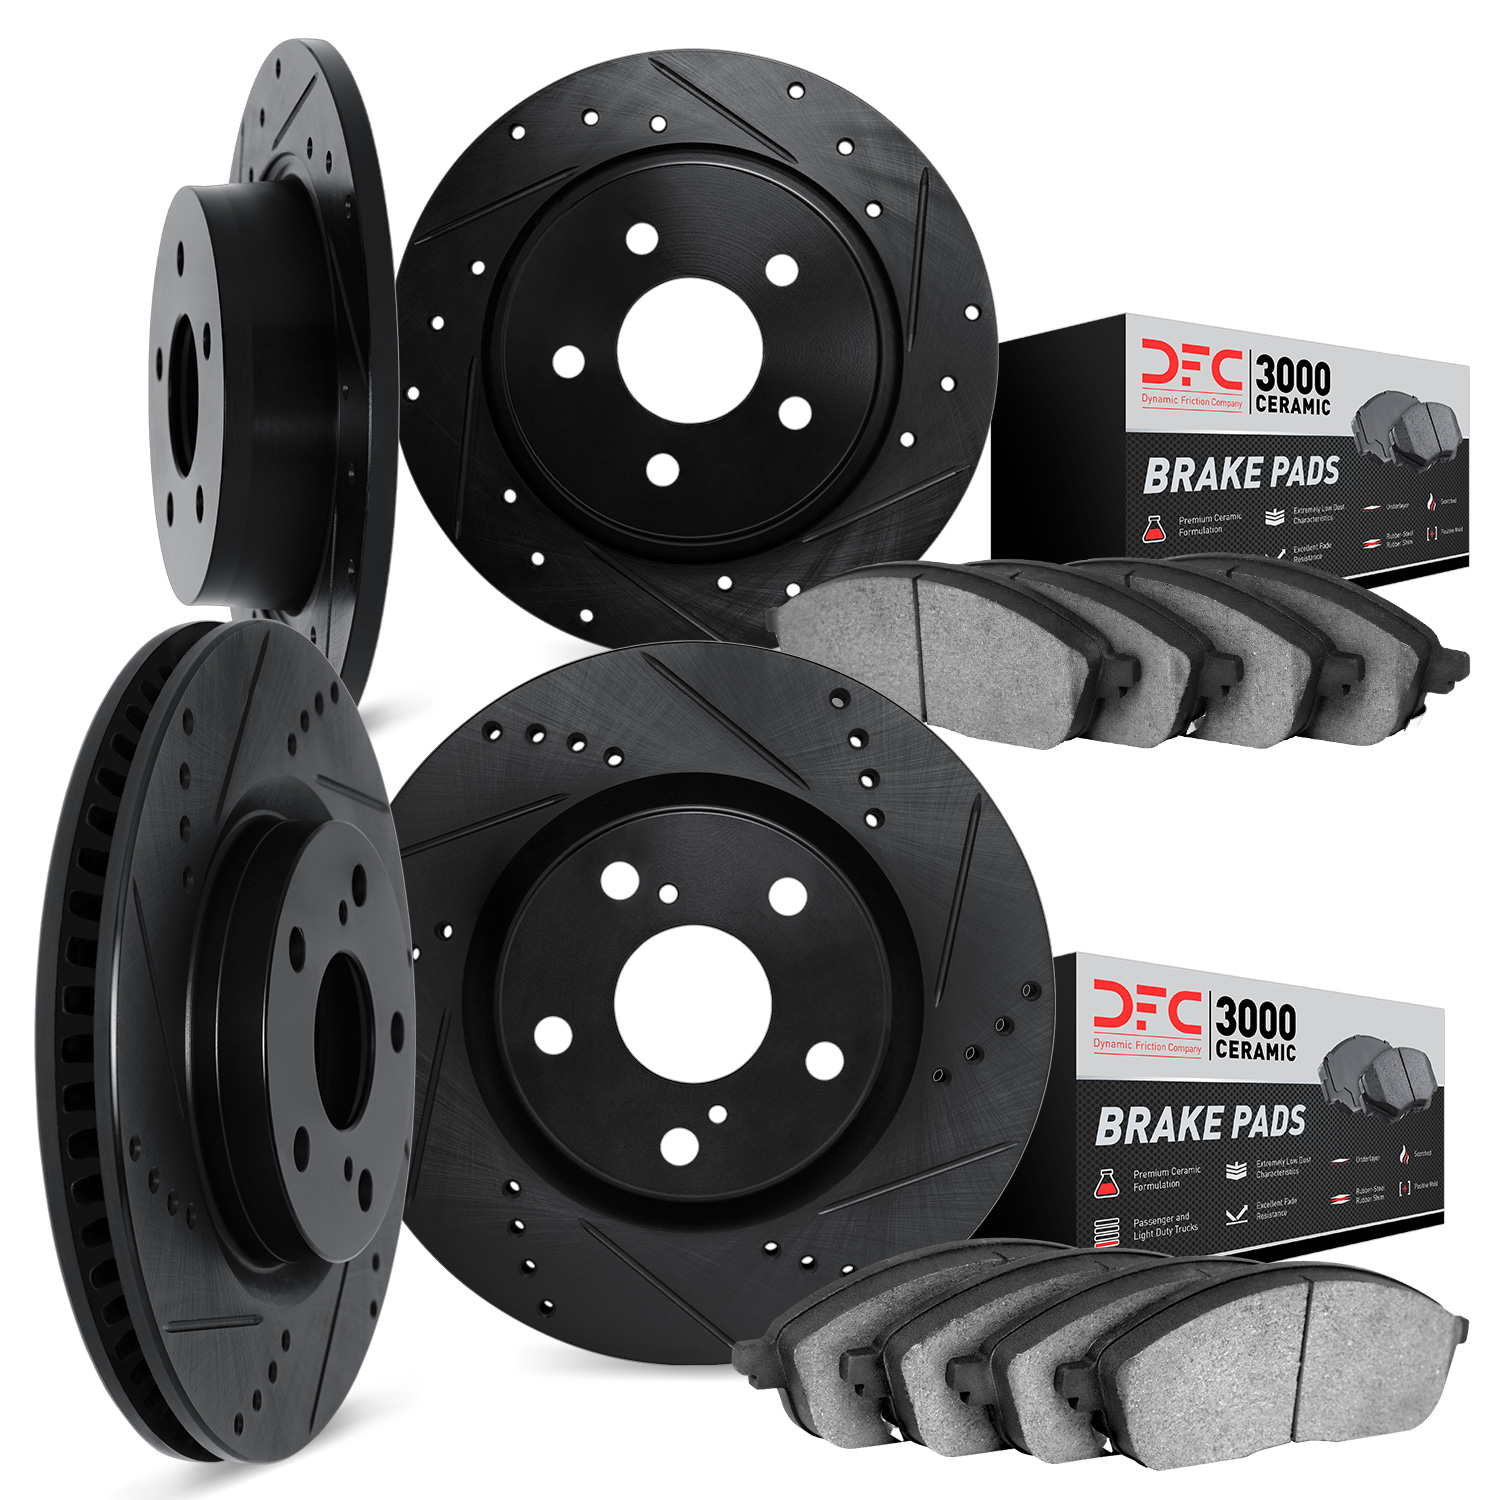 8304-40019 Drilled/Slotted Brake Rotors with 3000-Series Ceramic Brake Pads Kit [Black], 1998-2004 Mopar, Position: Front and Re